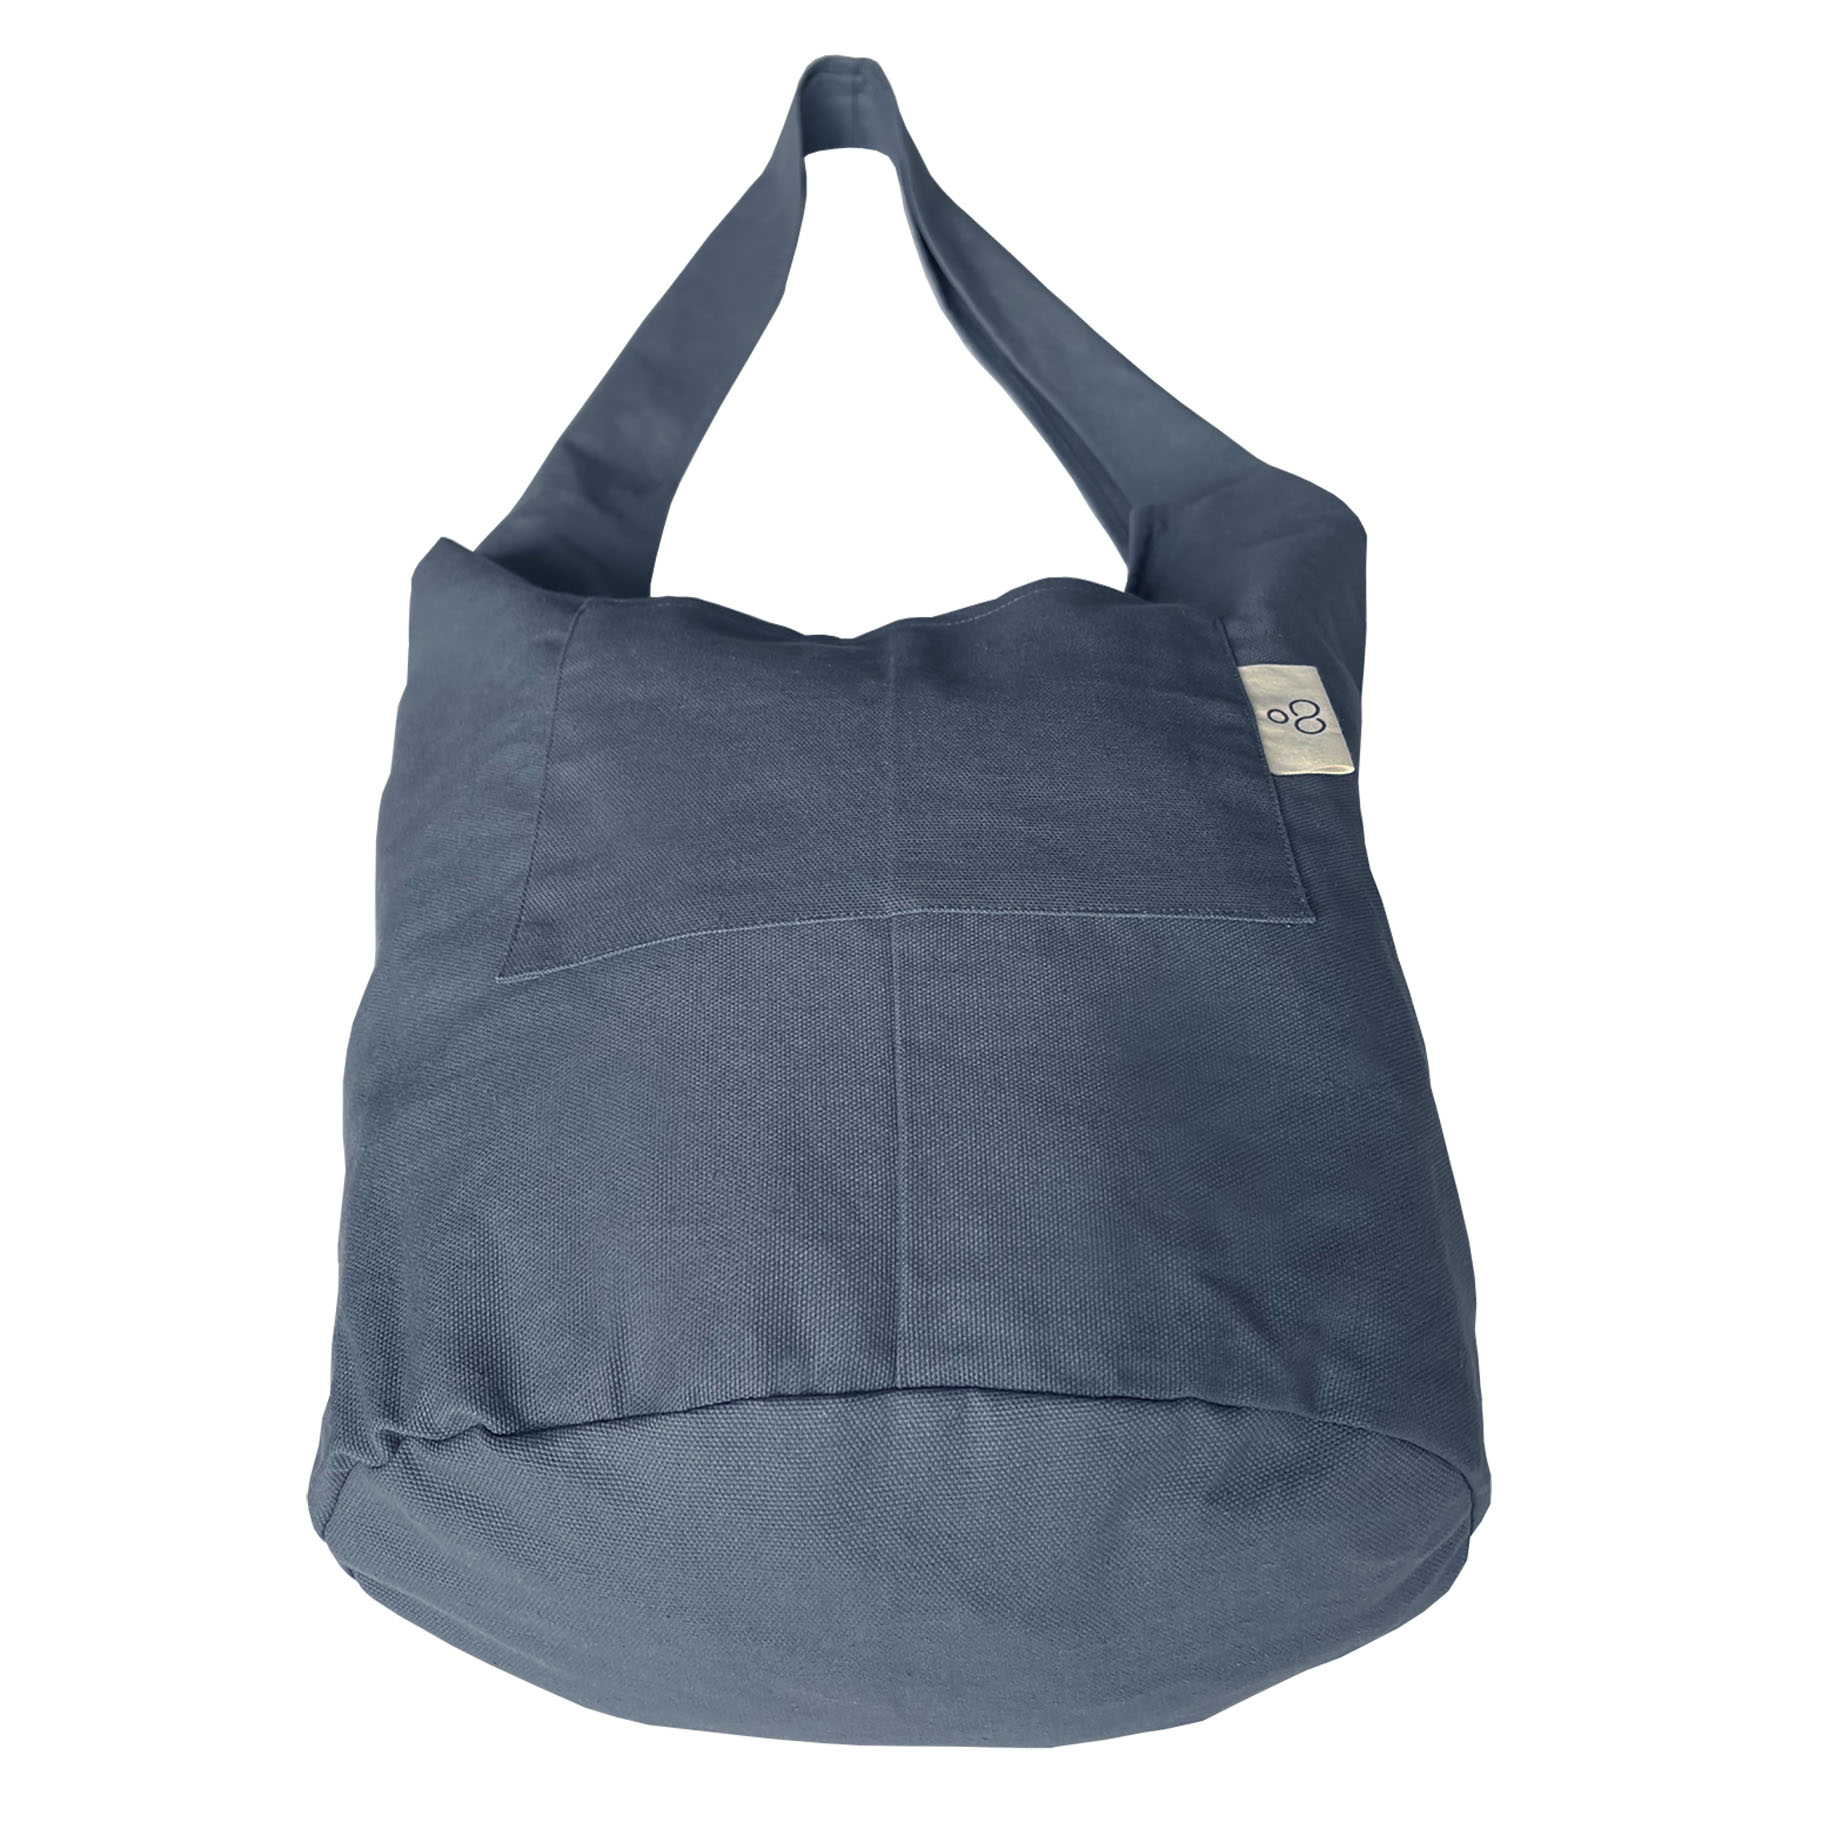 Yoga backpack in waxed canvas with zipper pocket and double yoga